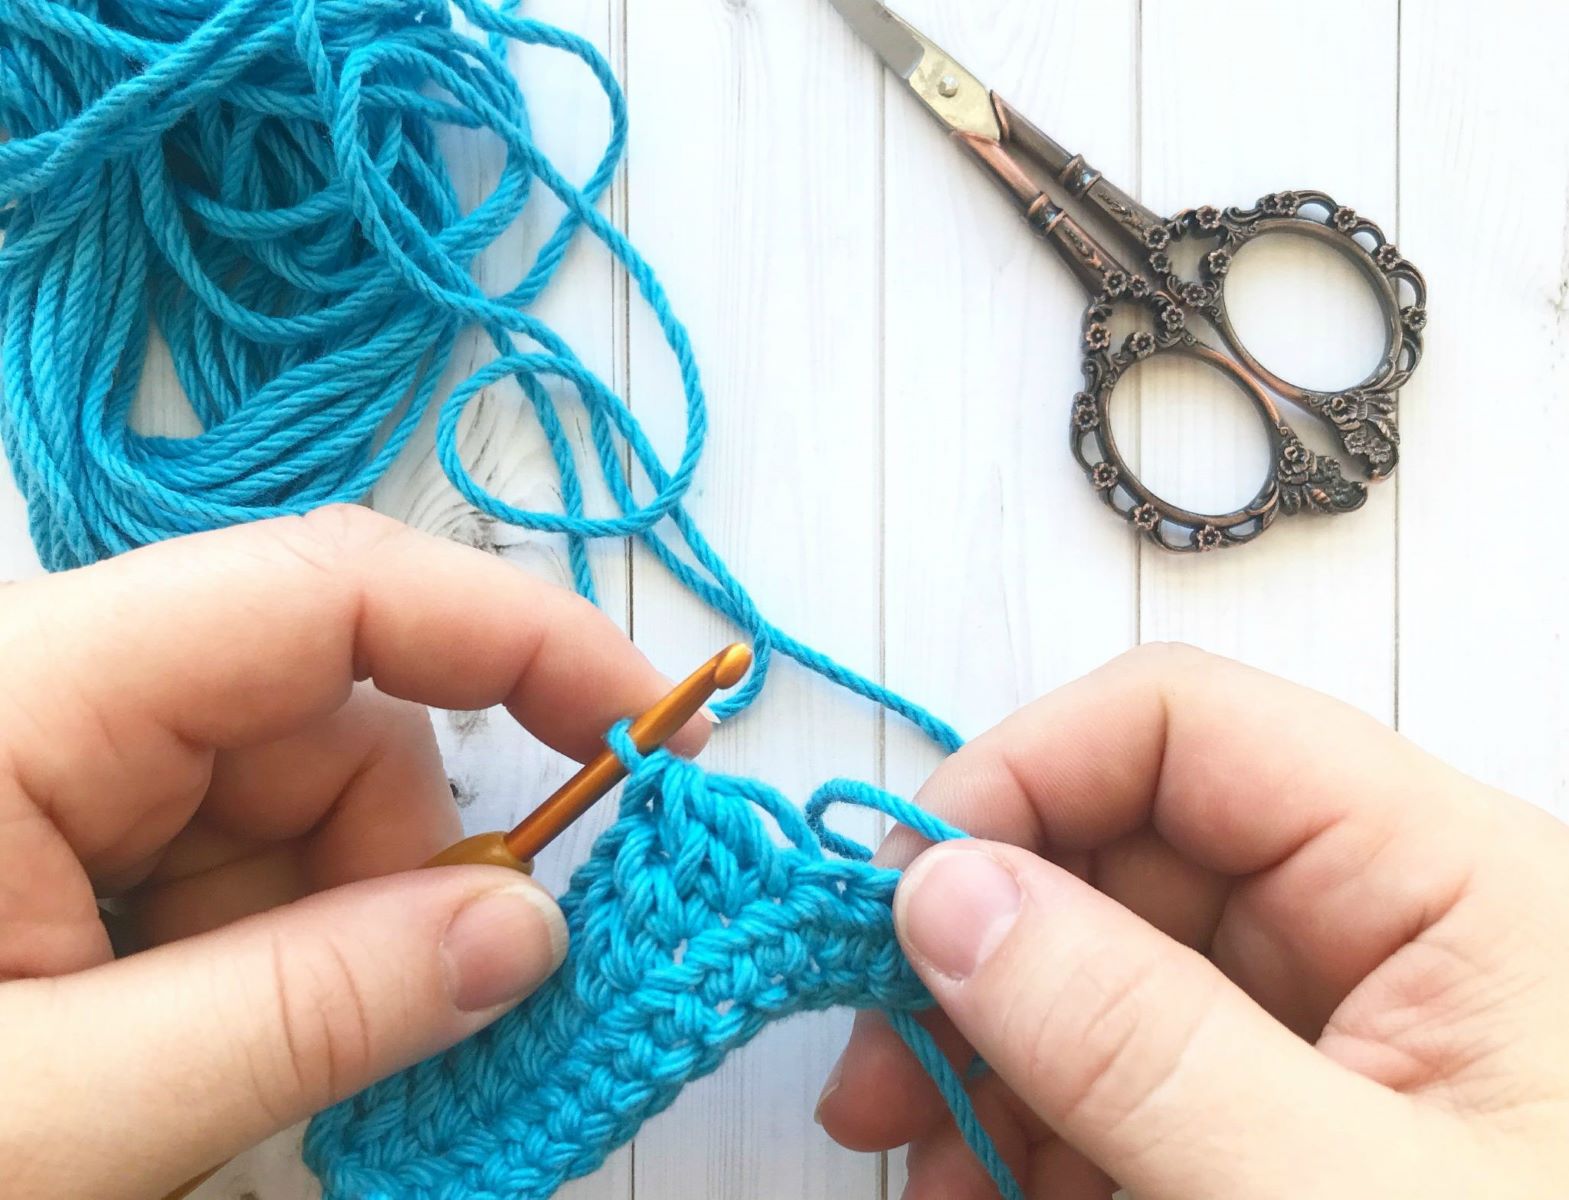 How To Decrease Stitches In Crochet